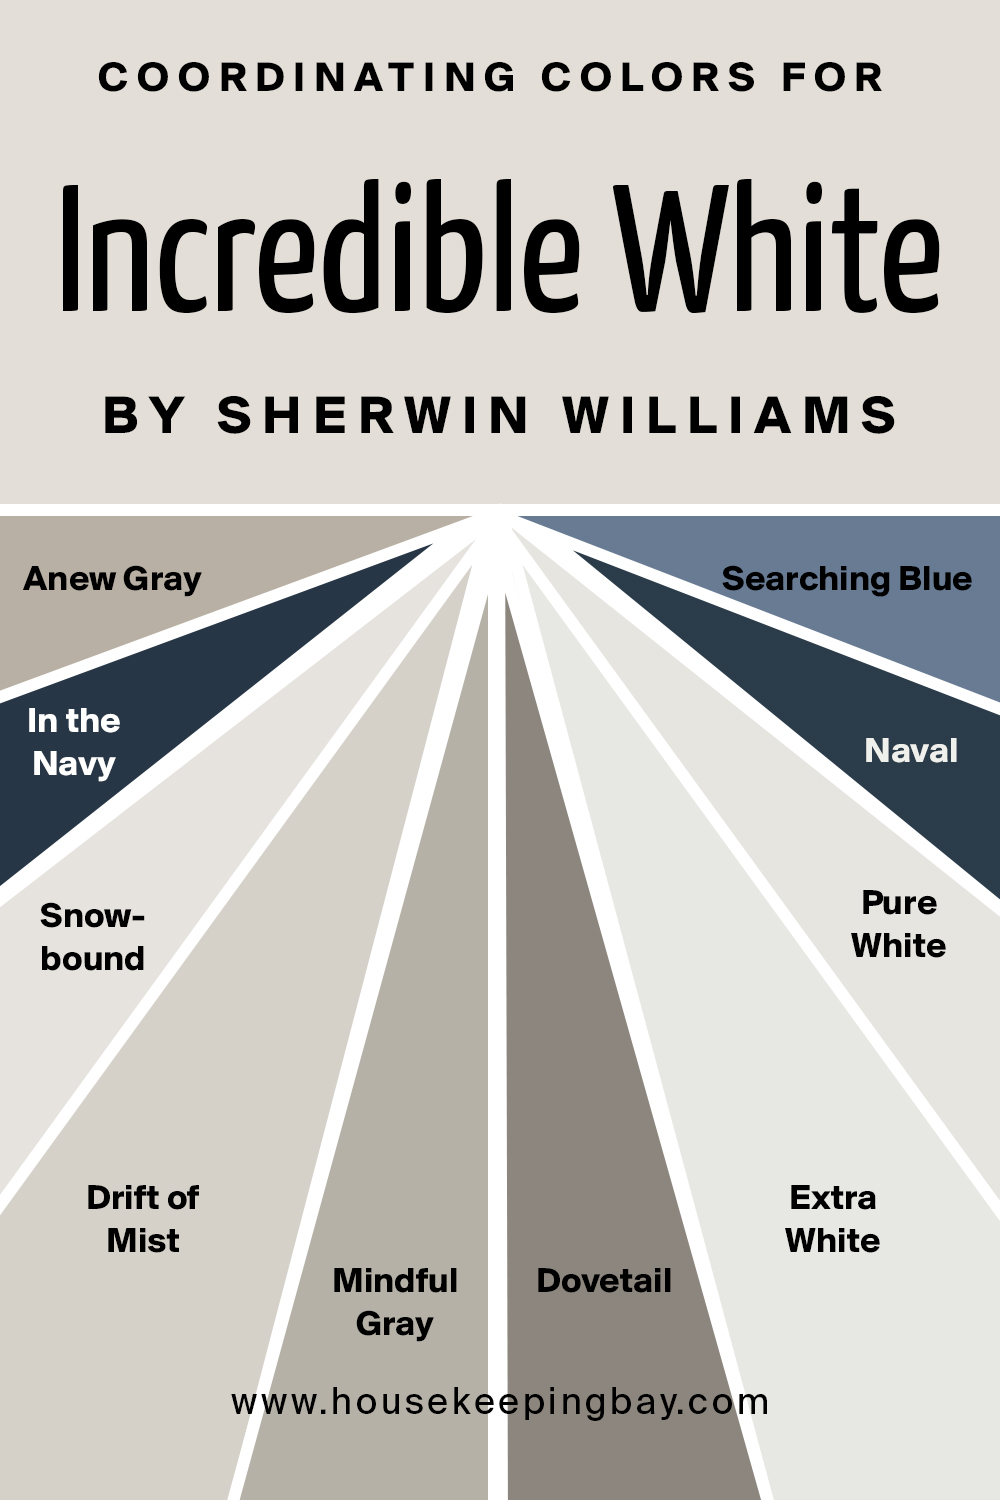 Coordinating Colors for Incredible White by Sherwin Williams